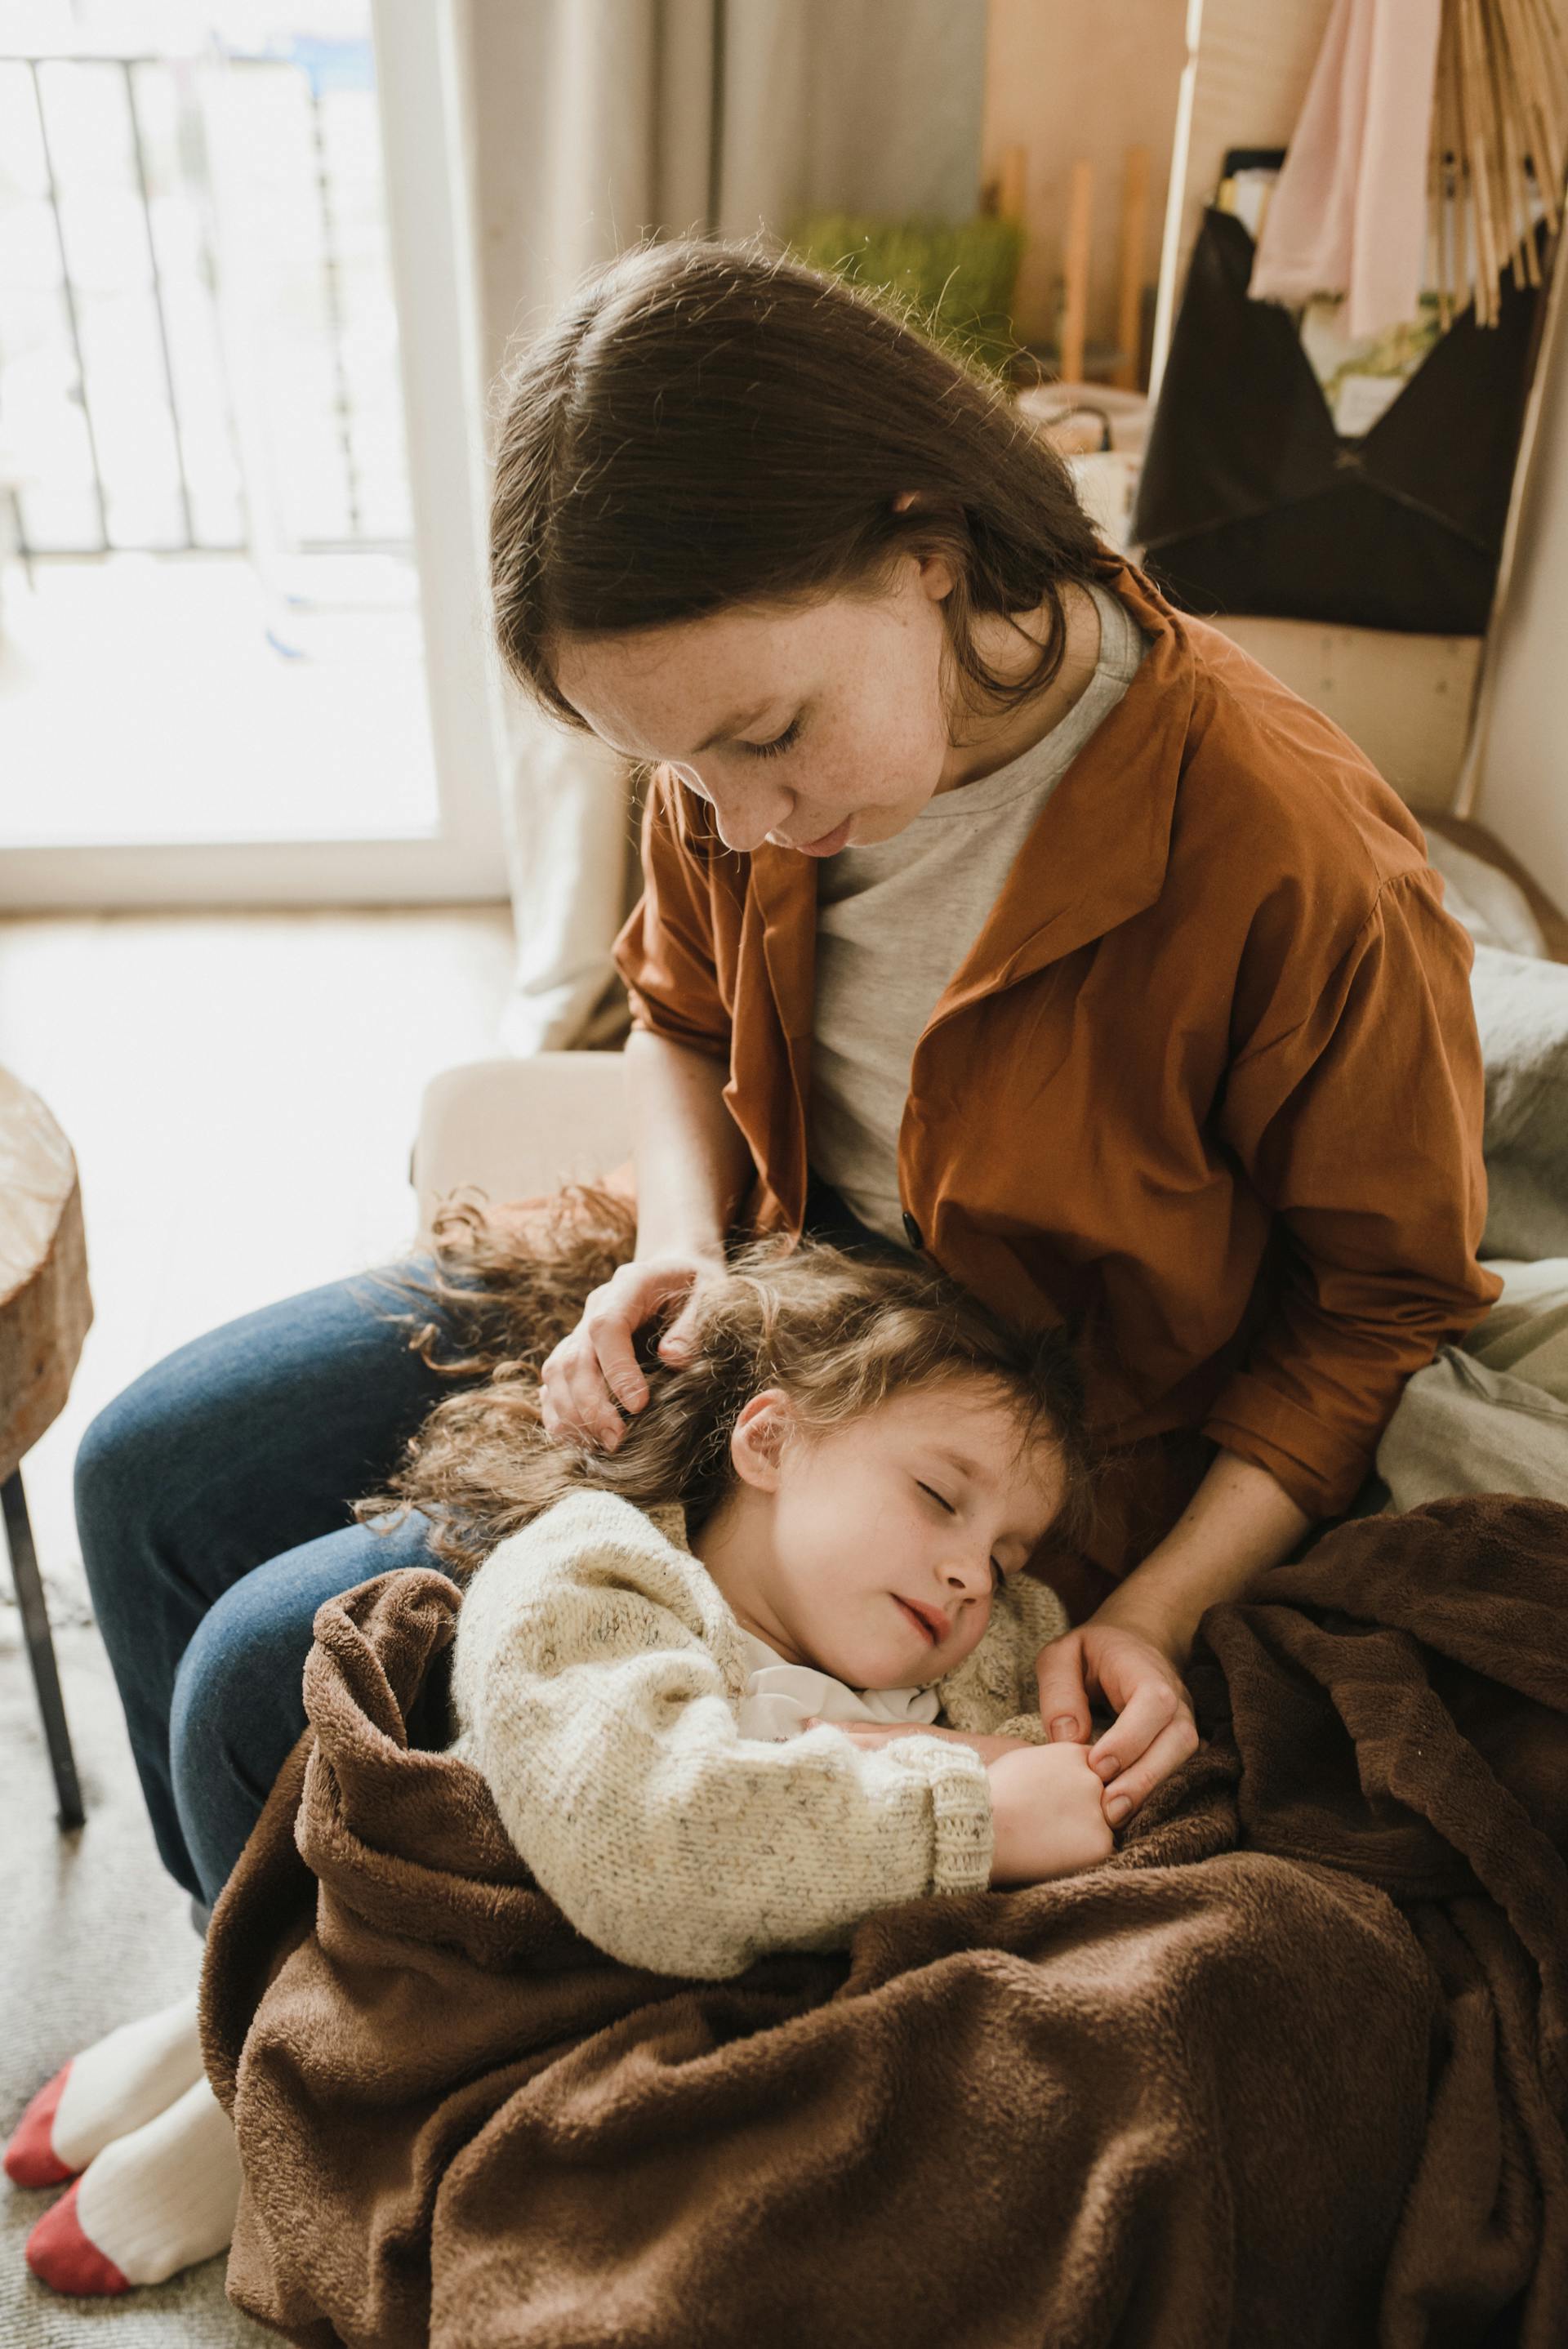 A little girl sleeping in her mother's lap | Source: Pexels